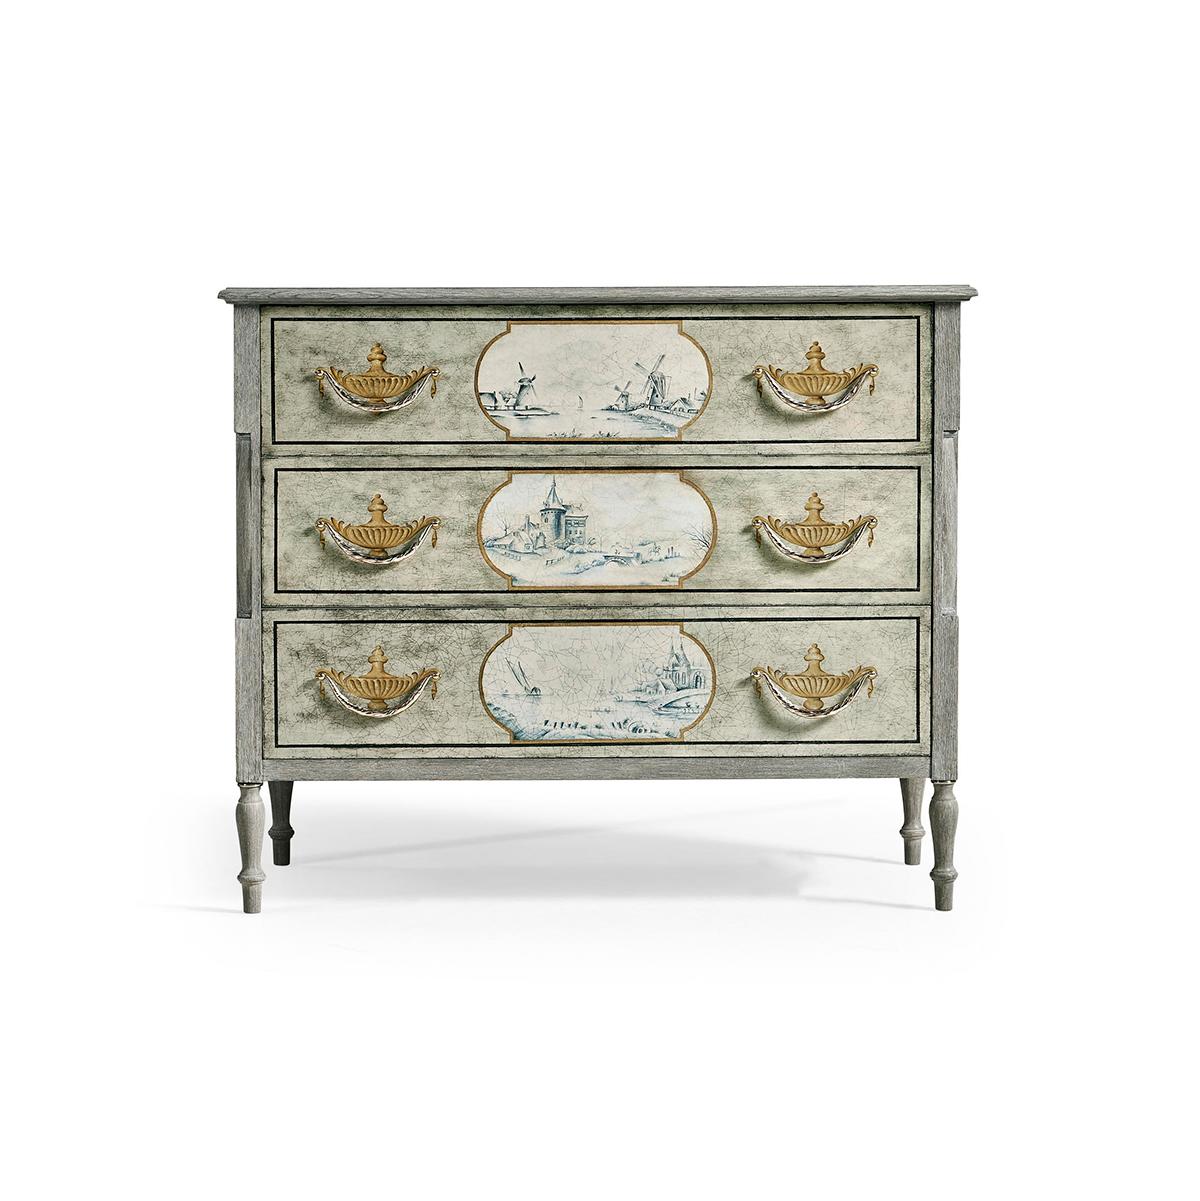 With a chipped blue finish infusing a touch of vintage character. The painted drawer fronts on crackled canvas are a true testament to craftsmanship and creativity. Each drawer front is hand-painted and meticulously crafted, then hand-rubbed to a